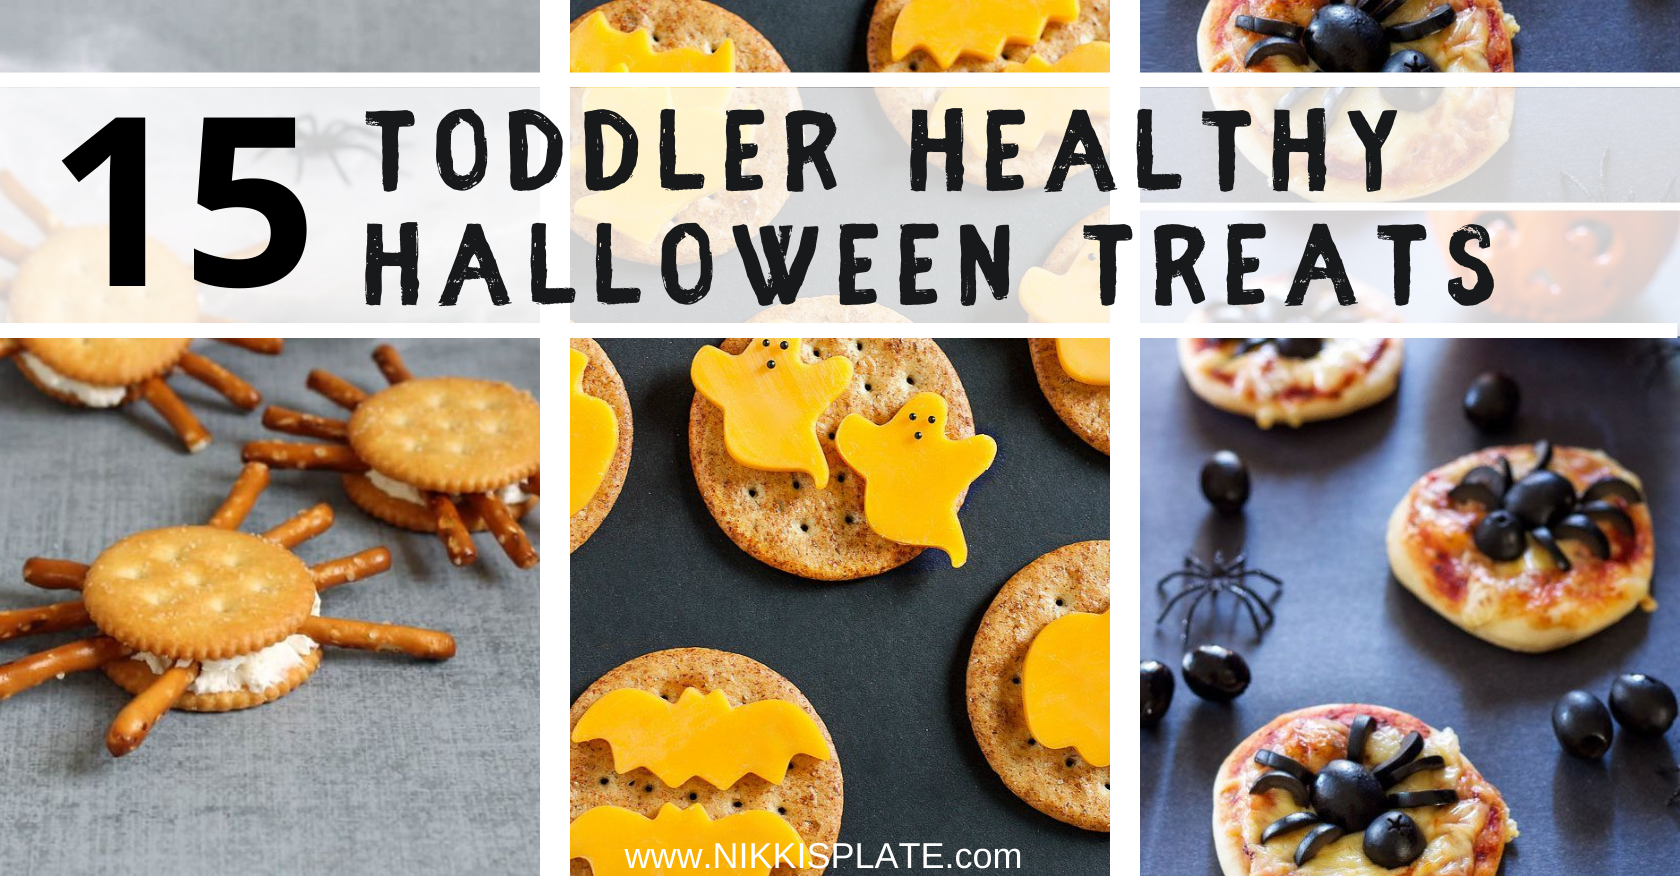 http://www.nikkisplate.com/wp-content/uploads/2022/09/Healthy-Halloween-Treats-Toddlers-Will-Love.png